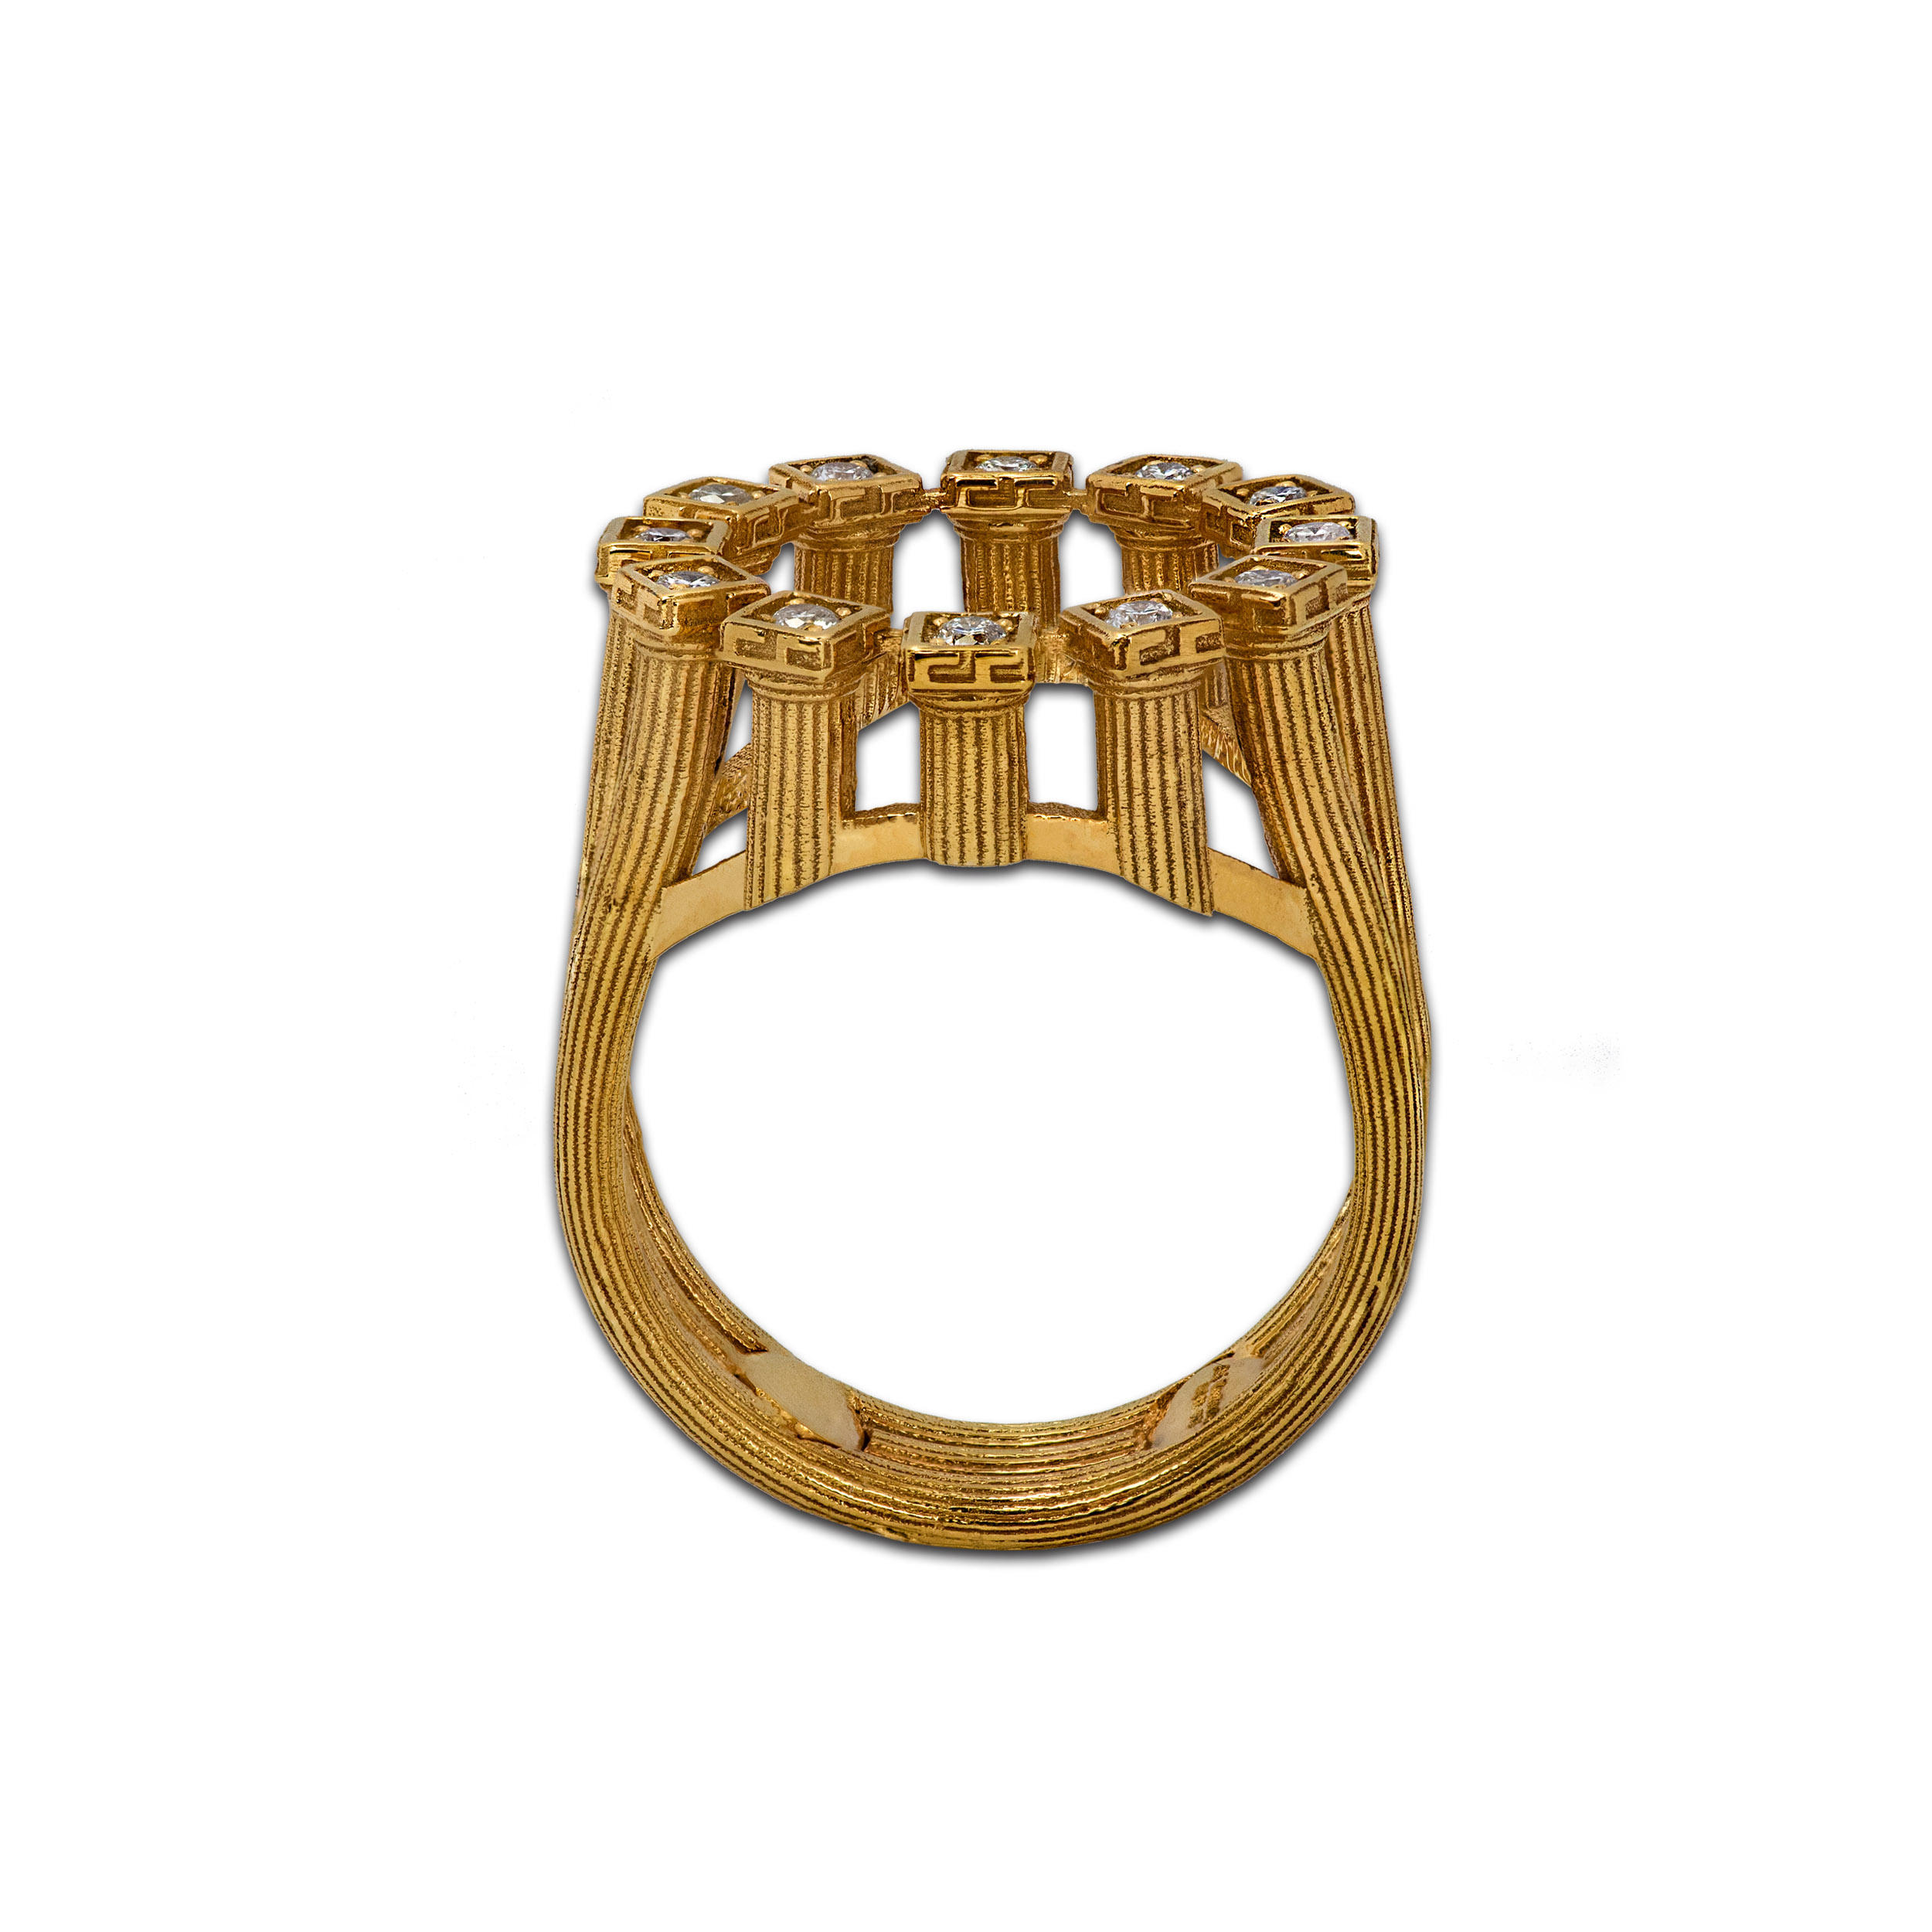 classical women's ring made from gold and real diamonds